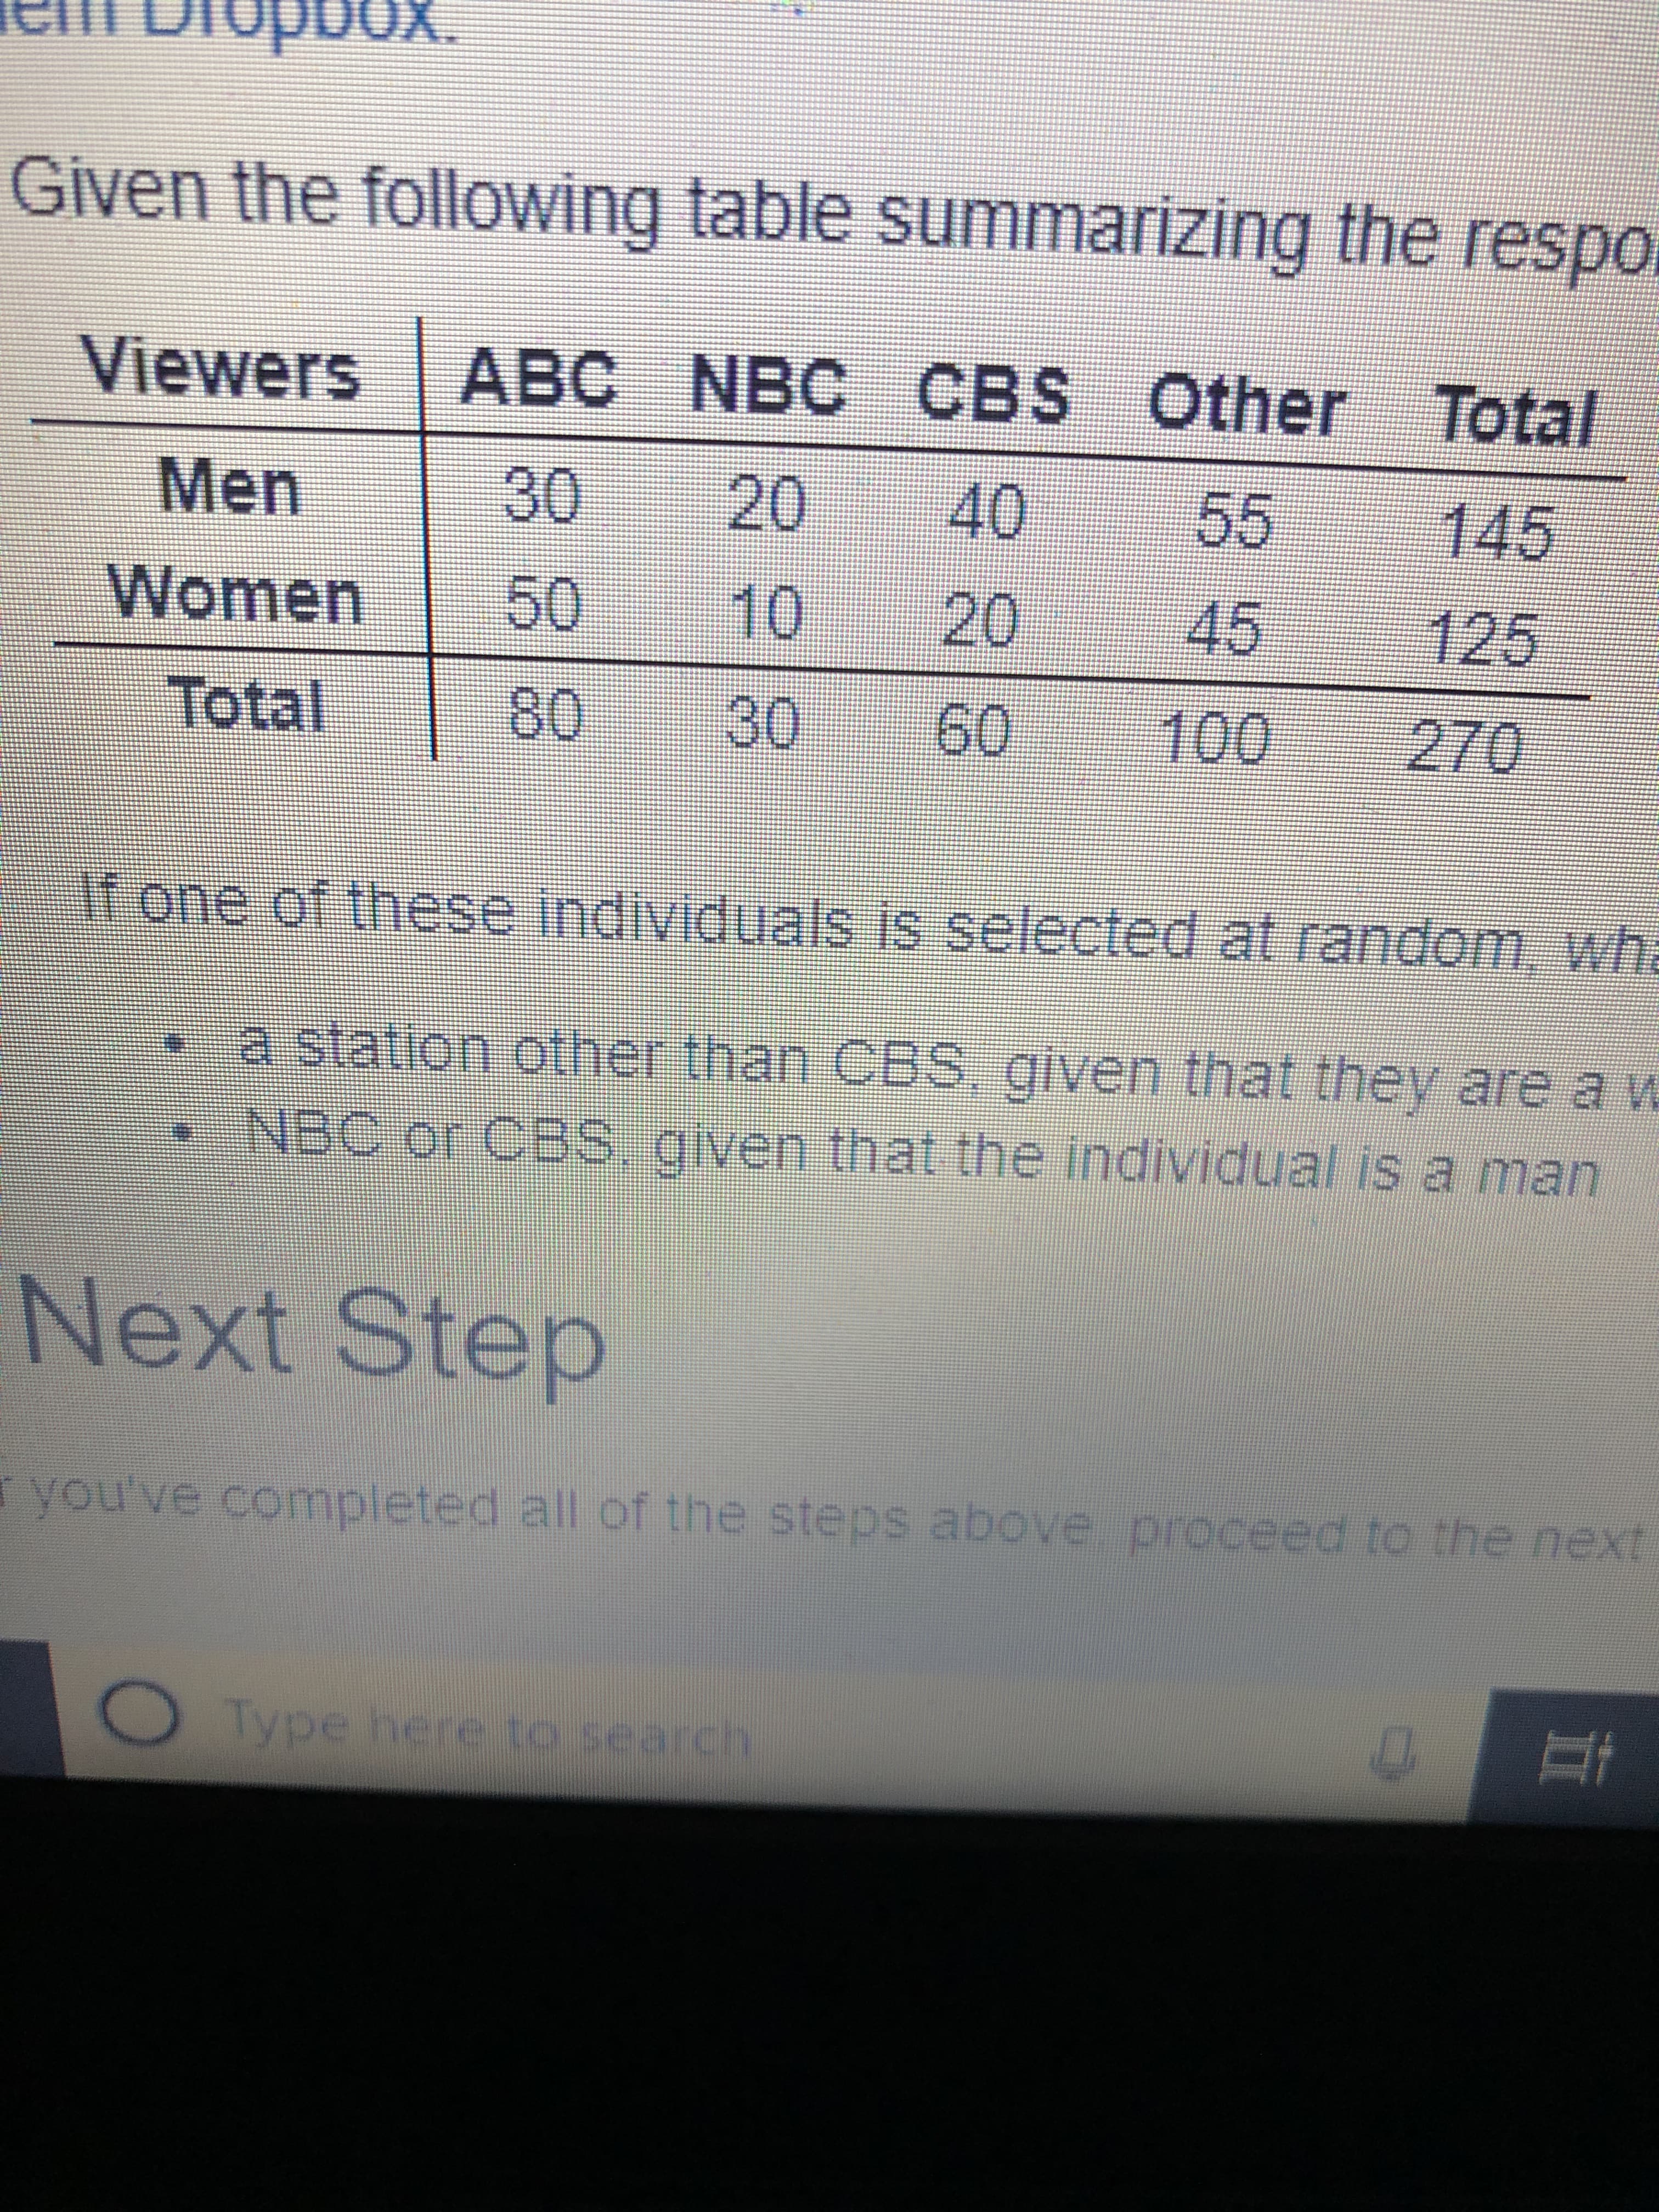 Given the following table summarizing the respo
Viewers ABC NBC
АВС
CBS Other Total
Men
20
30
40
55
145
50
-Women
10
20
45
125
Total
80
30
100
60
270
fone of these individuals is selected at random, wh
a station other than CBS given that they area w
NBc or CBS. given that the individual is a man
Next Step
ryou've completed all of the steps above proceed to the next
Type here to search
